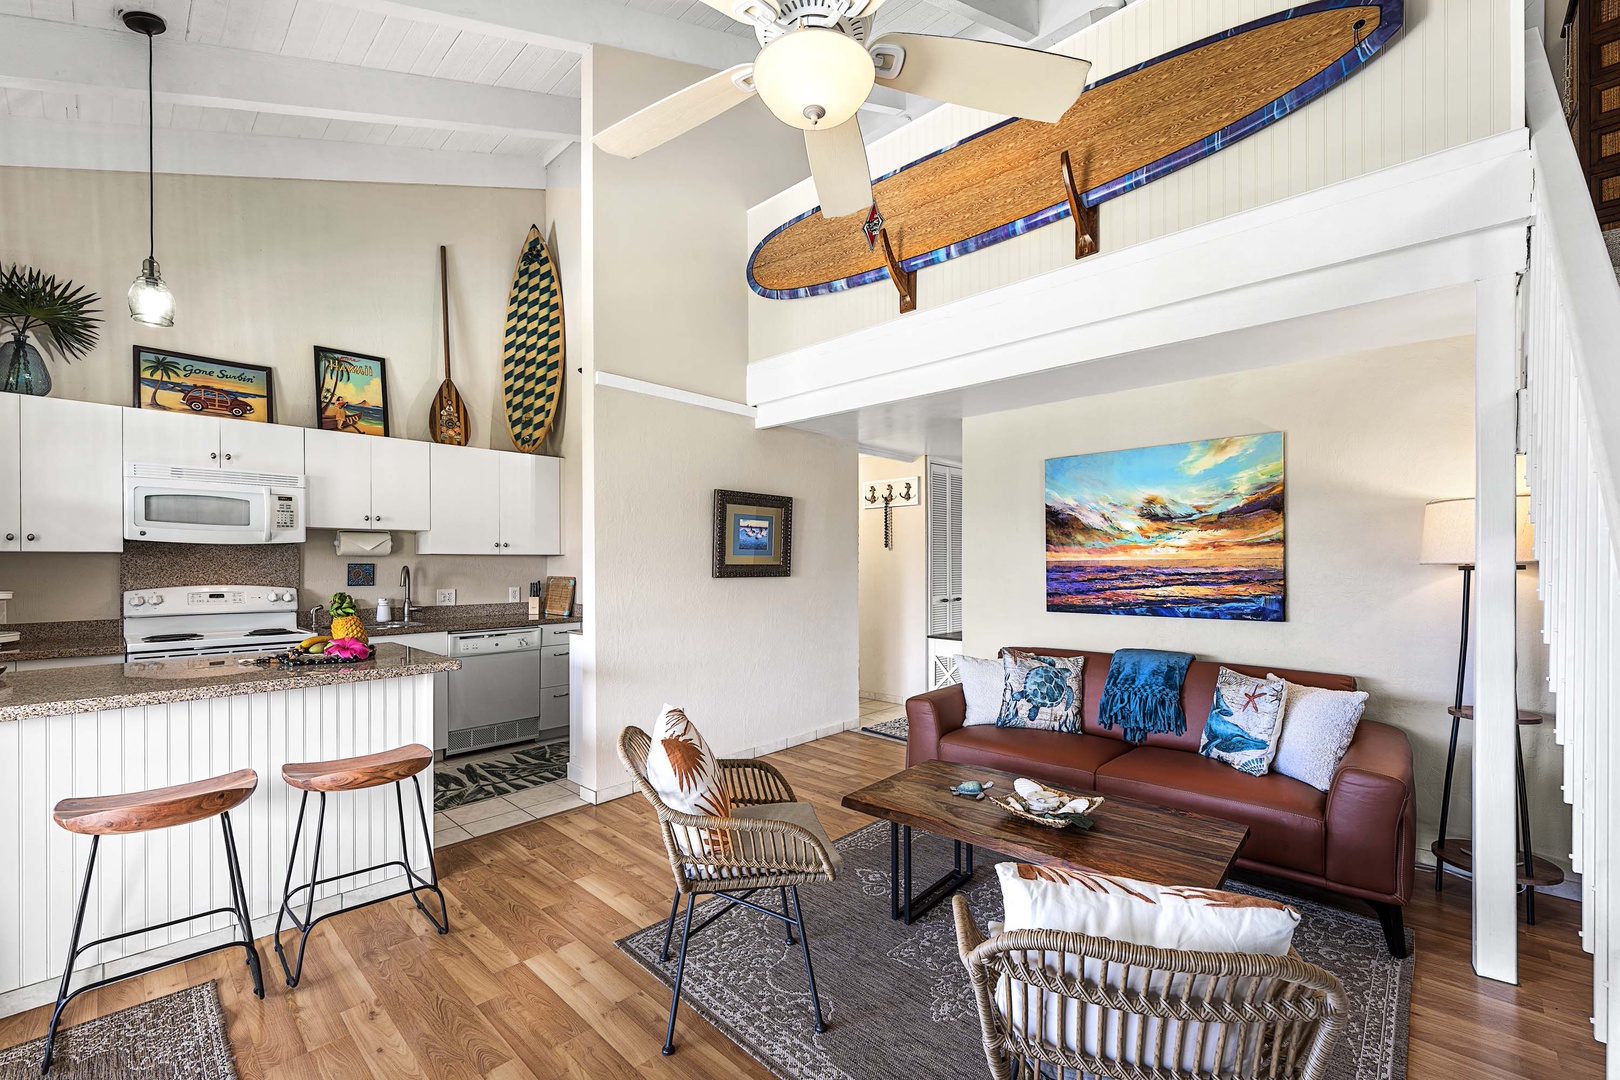 Kailua Kona Vacation Rentals, Kona Makai 6303 - This humble abode has open concept floorplan that invites light, flow, and shared moments.